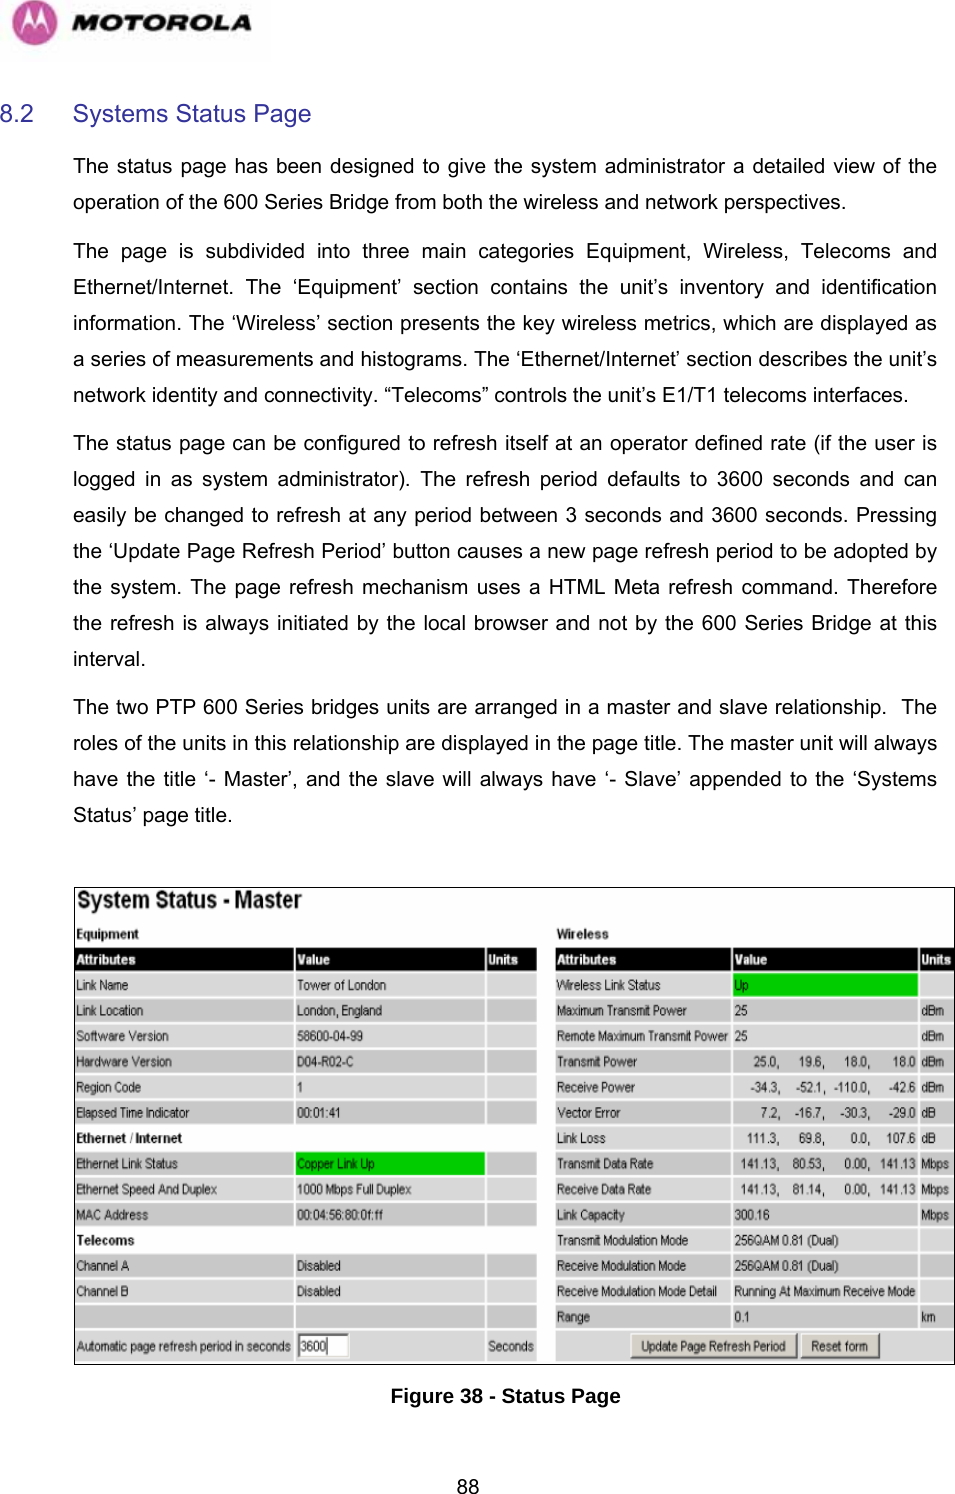   888.2  Systems Status Page  The status page has been designed to give the system administrator a detailed view of the operation of the 600 Series Bridge from both the wireless and network perspectives.  The page is subdivided into three main categories Equipment, Wireless, Telecoms and Ethernet/Internet. The ‘Equipment’ section contains the unit’s inventory and identification information. The ‘Wireless’ section presents the key wireless metrics, which are displayed as a series of measurements and histograms. The ‘Ethernet/Internet’ section describes the unit’s network identity and connectivity. “Telecoms” controls the unit’s E1/T1 telecoms interfaces. The status page can be configured to refresh itself at an operator defined rate (if the user is logged in as system administrator). The refresh period defaults to 3600 seconds and can easily be changed to refresh at any period between 3 seconds and 3600 seconds. Pressing the ‘Update Page Refresh Period’ button causes a new page refresh period to be adopted by the system. The page refresh mechanism uses a HTML Meta refresh command. Therefore the refresh is always initiated by the local browser and not by the 600 Series Bridge at this interval. The two PTP 600 Series bridges units are arranged in a master and slave relationship.  The roles of the units in this relationship are displayed in the page title. The master unit will always have the title ‘- Master’, and the slave will always have ‘- Slave’ appended to the ‘Systems Status’ page title.   Figure 38 - Status Page 